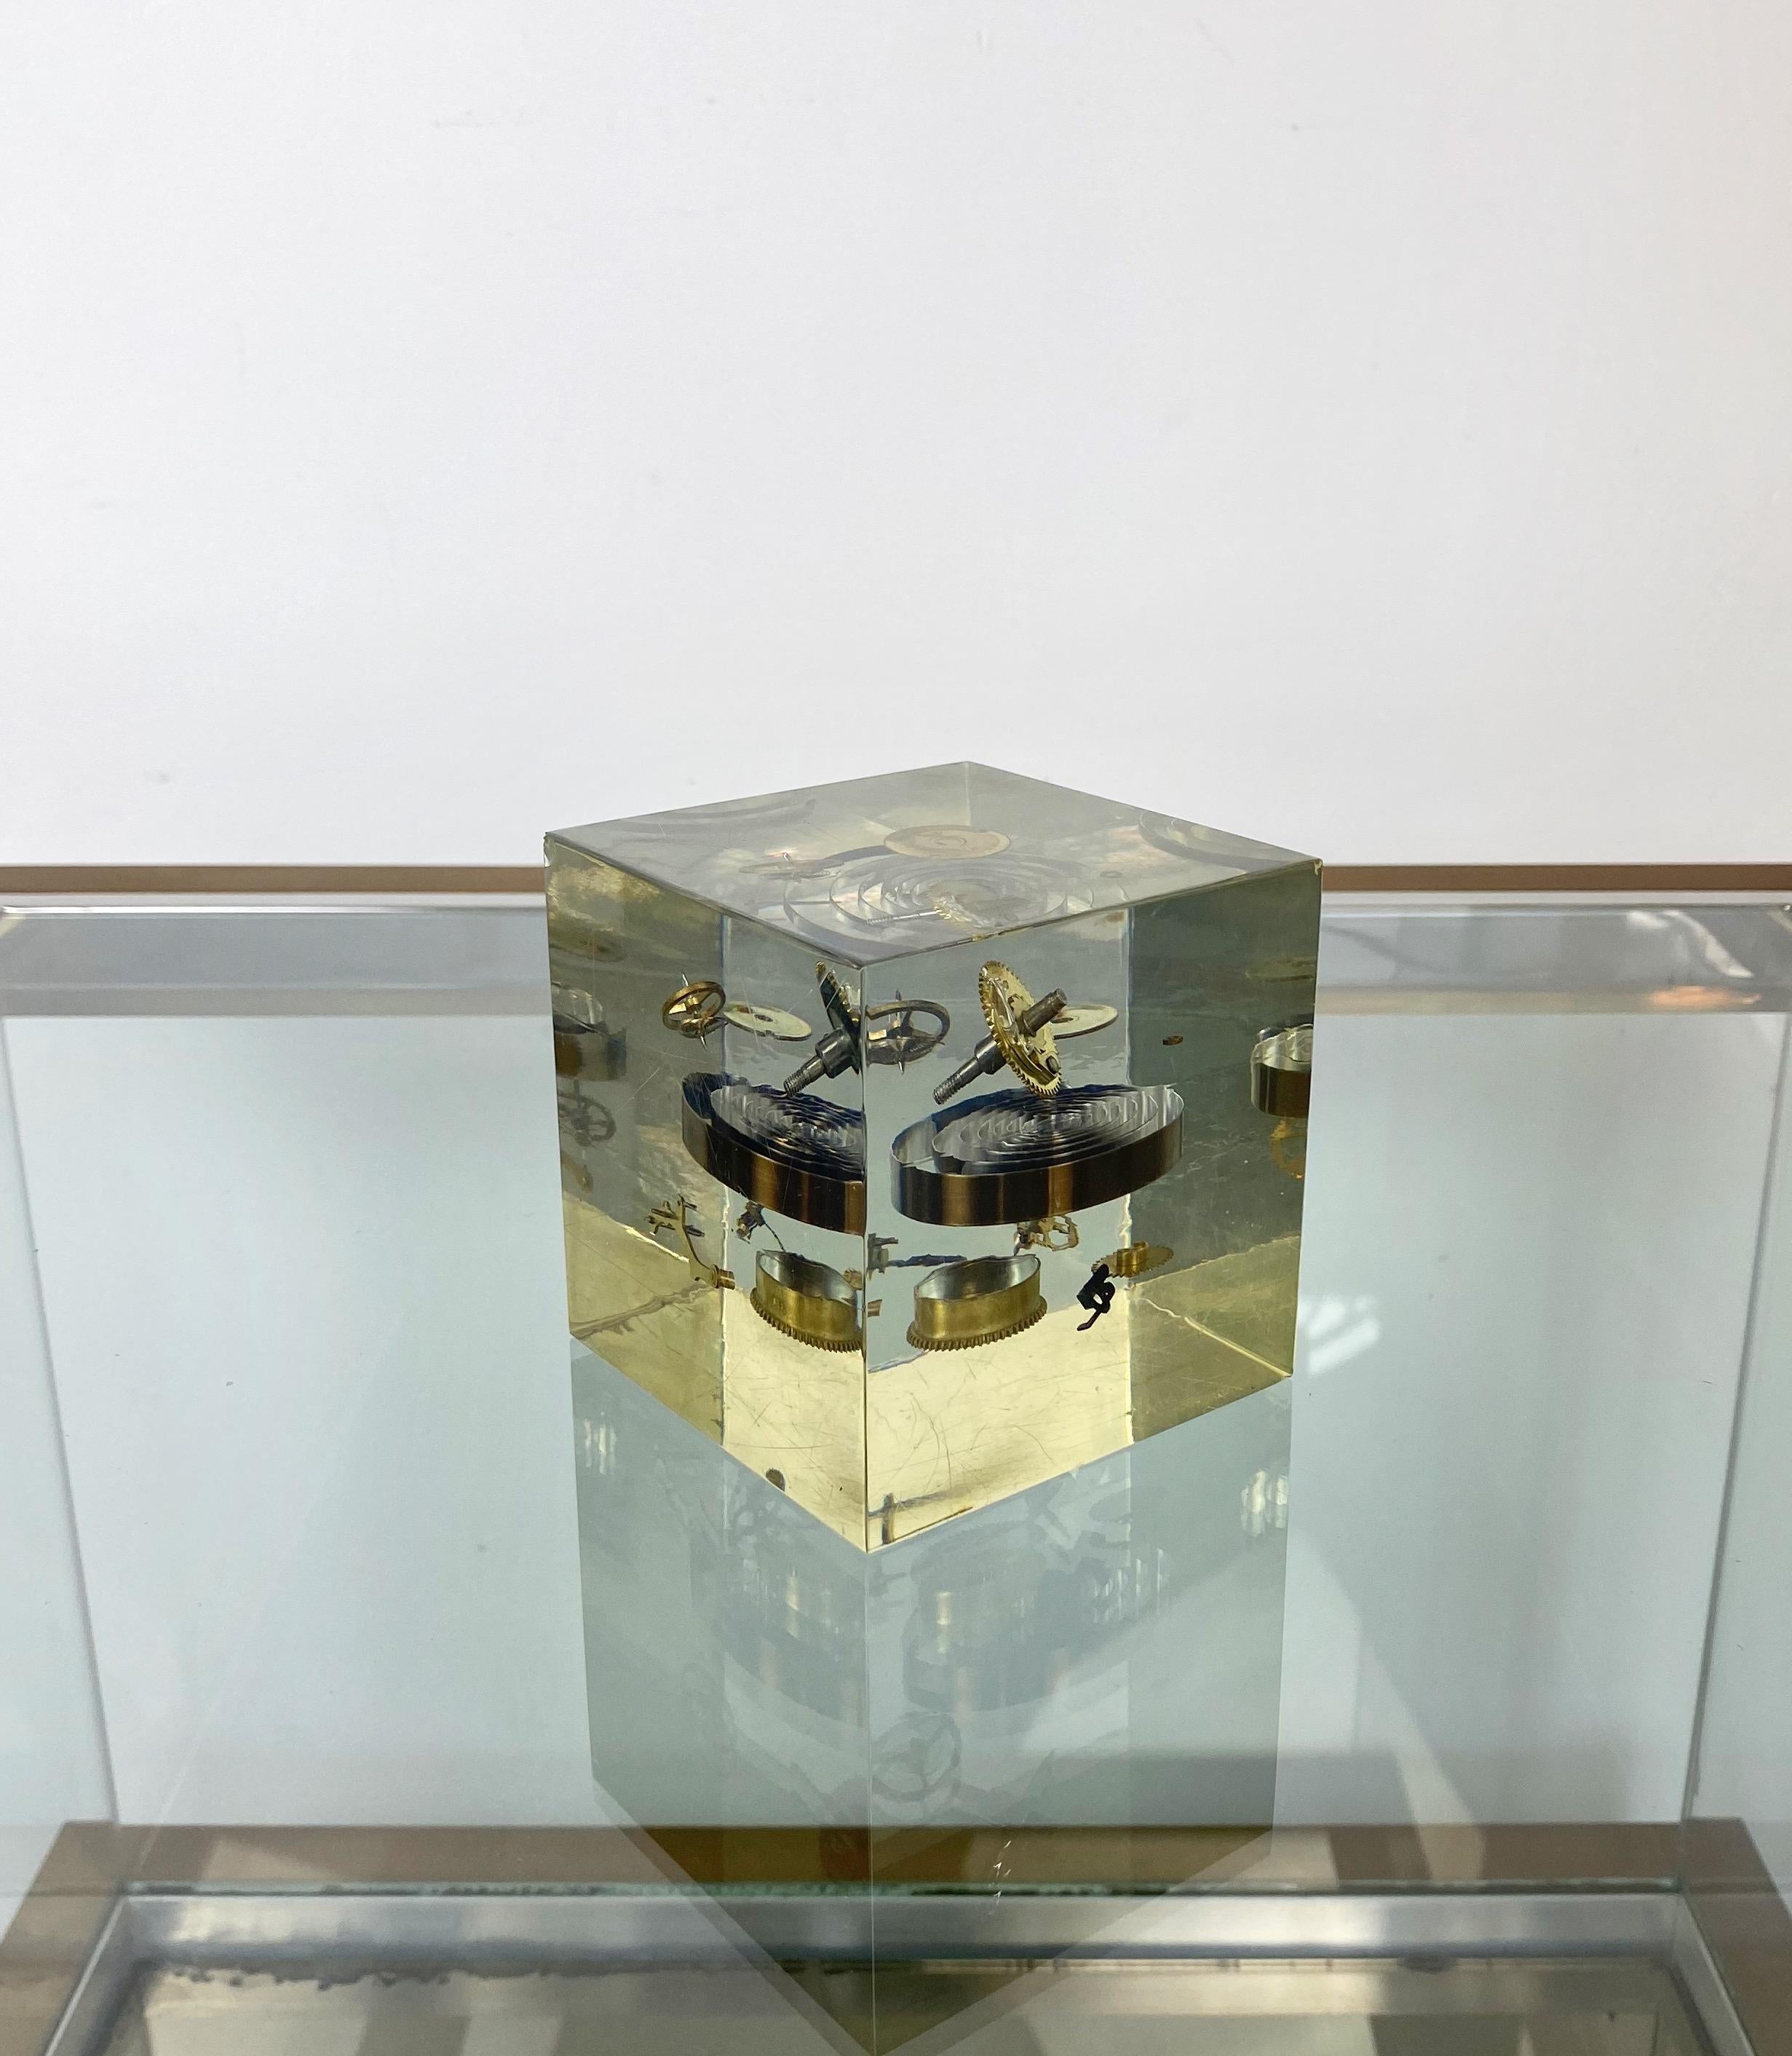 Cube sculpture with clock parts immersed in acrylic by Pierre Giraudon. Made in France, circa 1970.